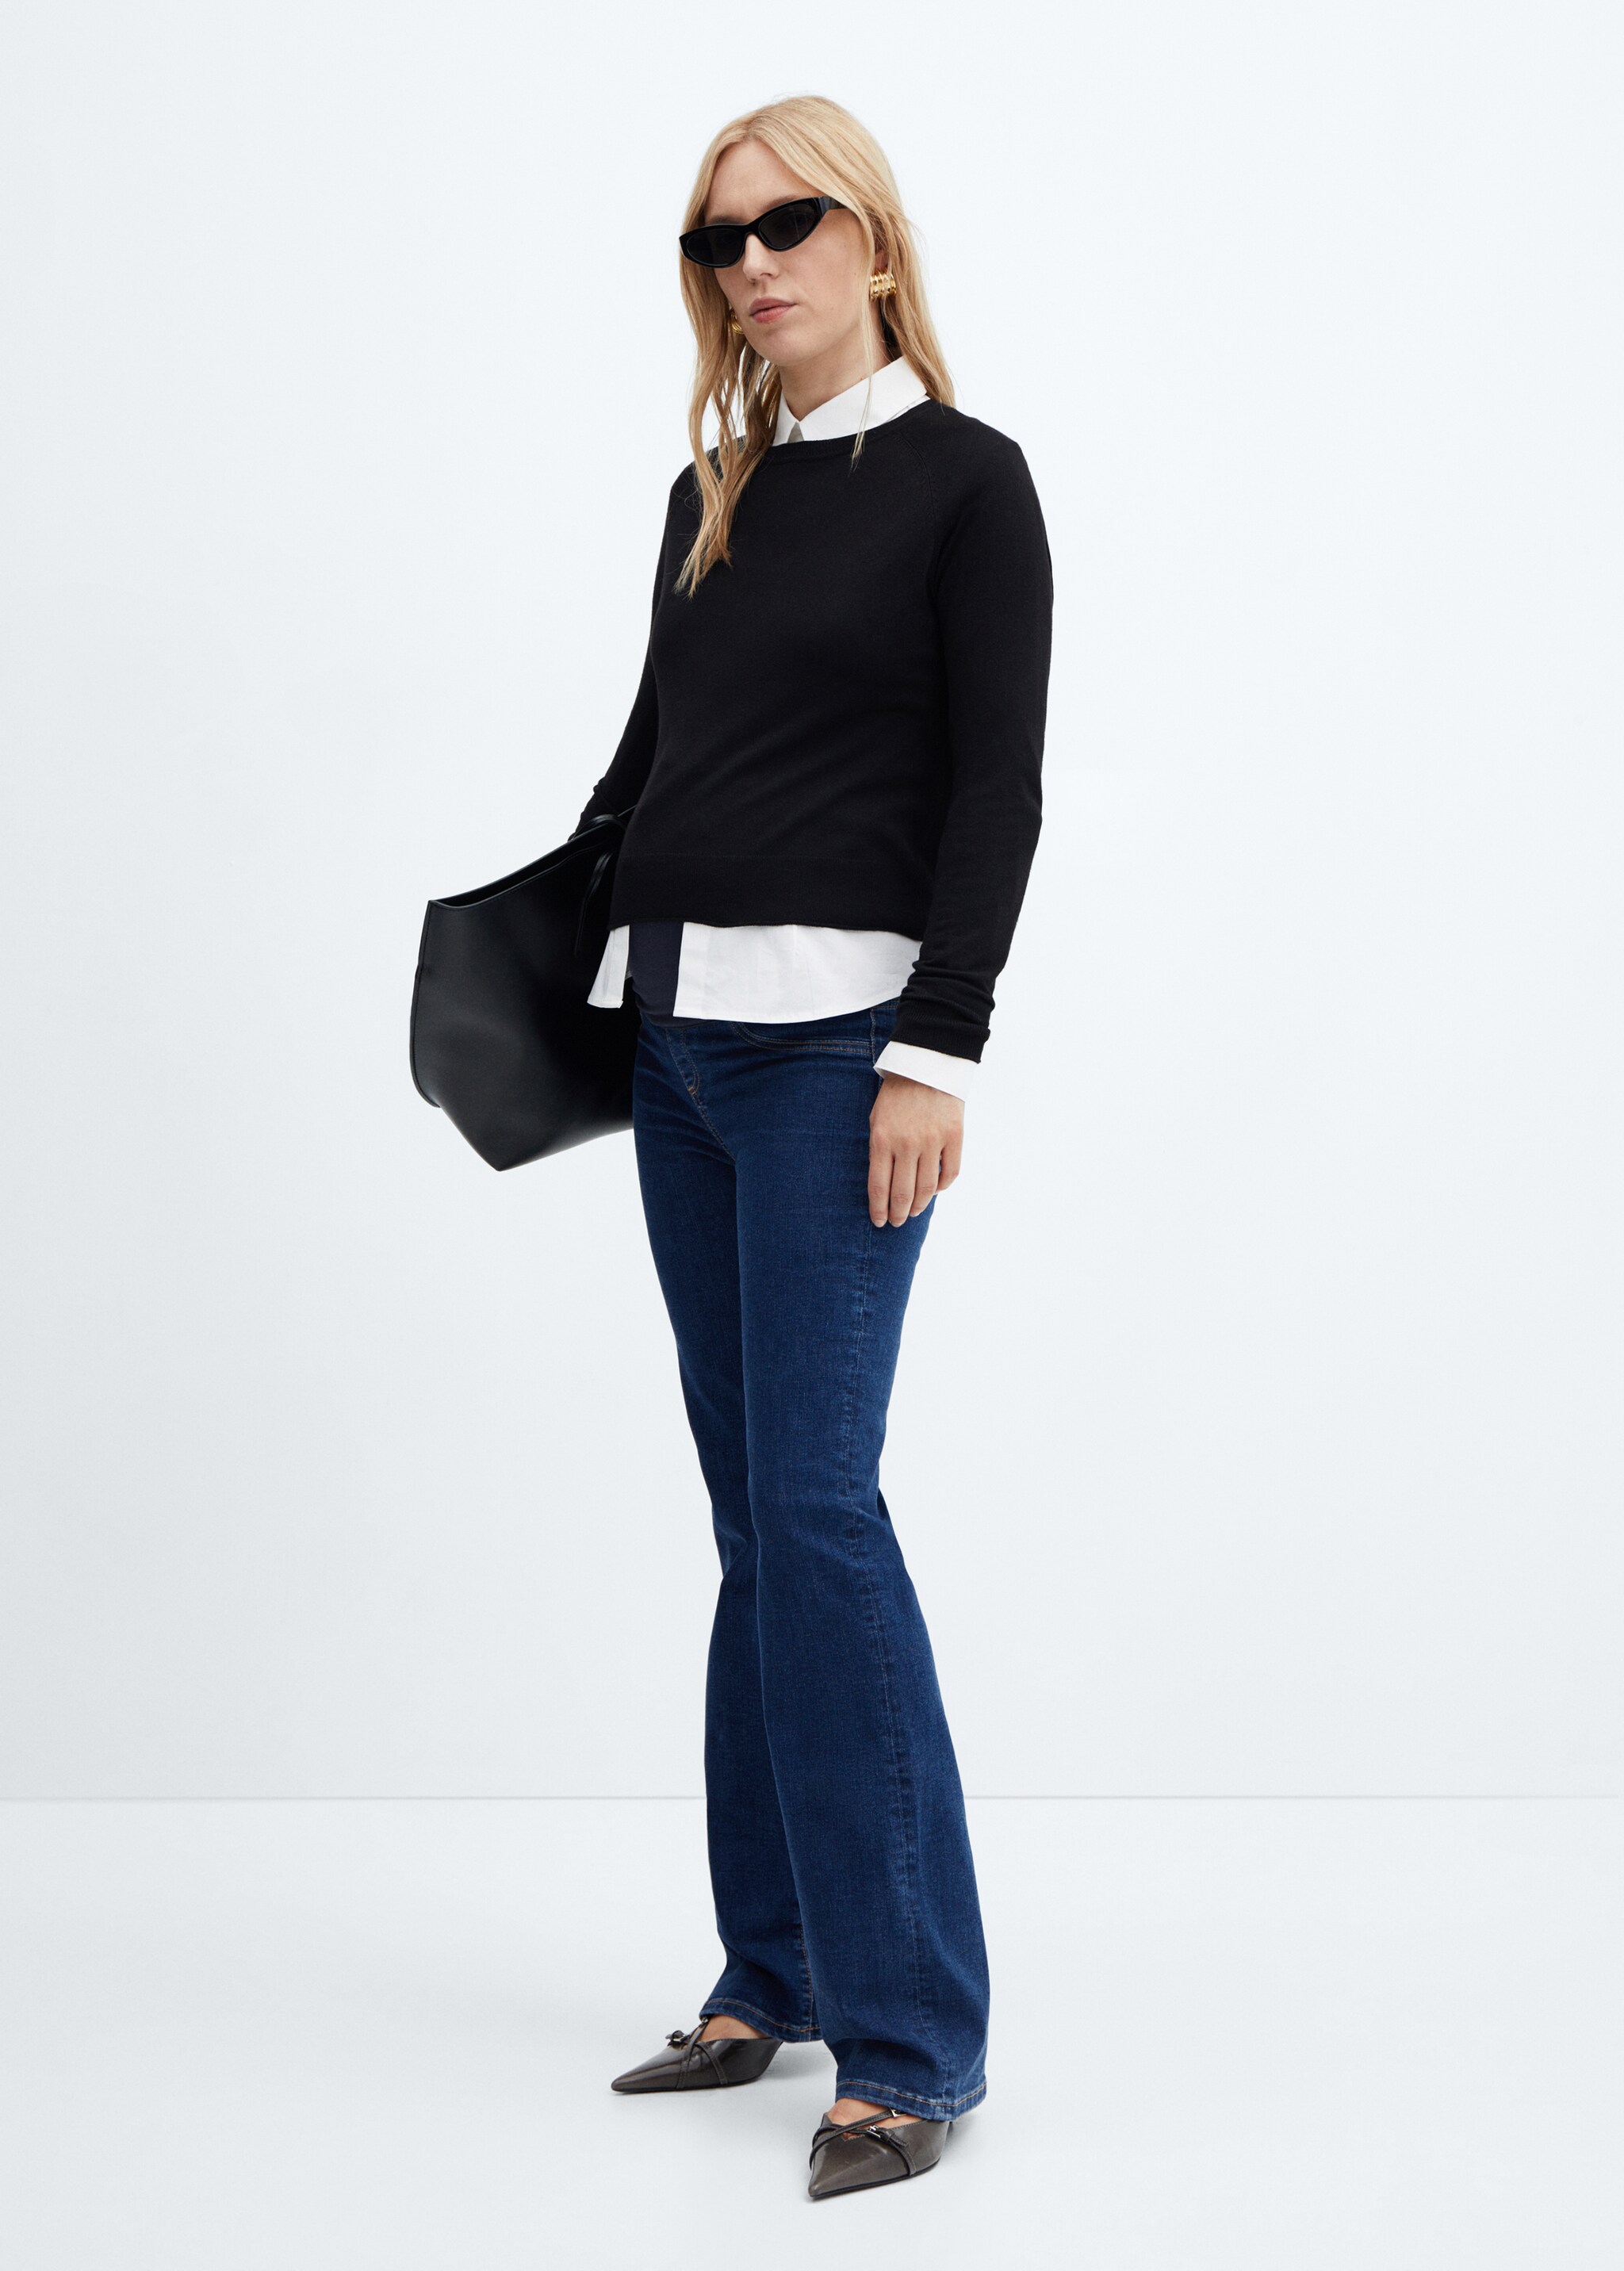 Maternity flared jeans - General plane